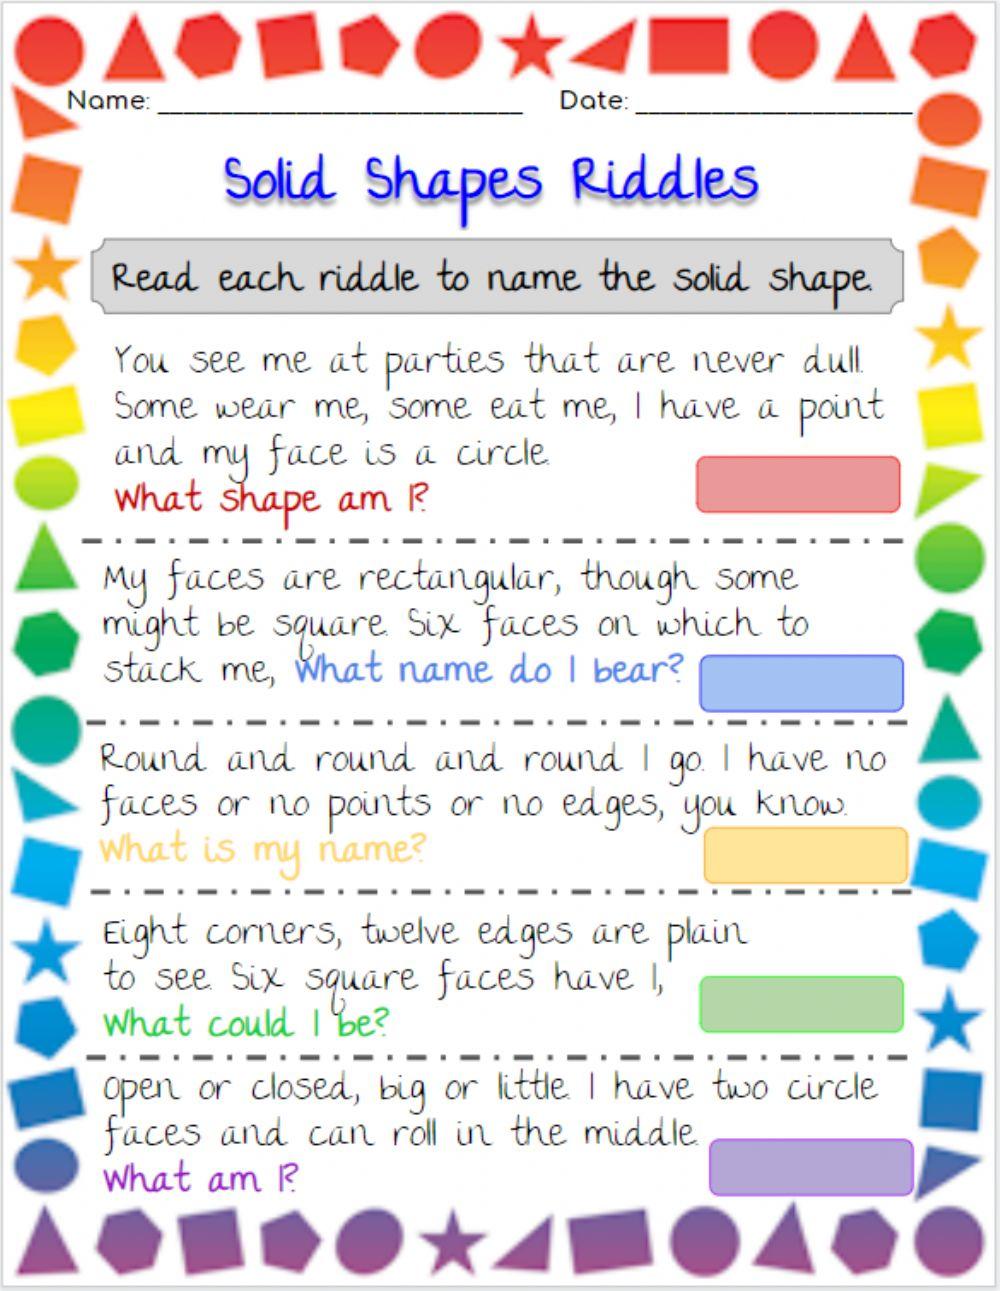 Solid Shapes Riddles